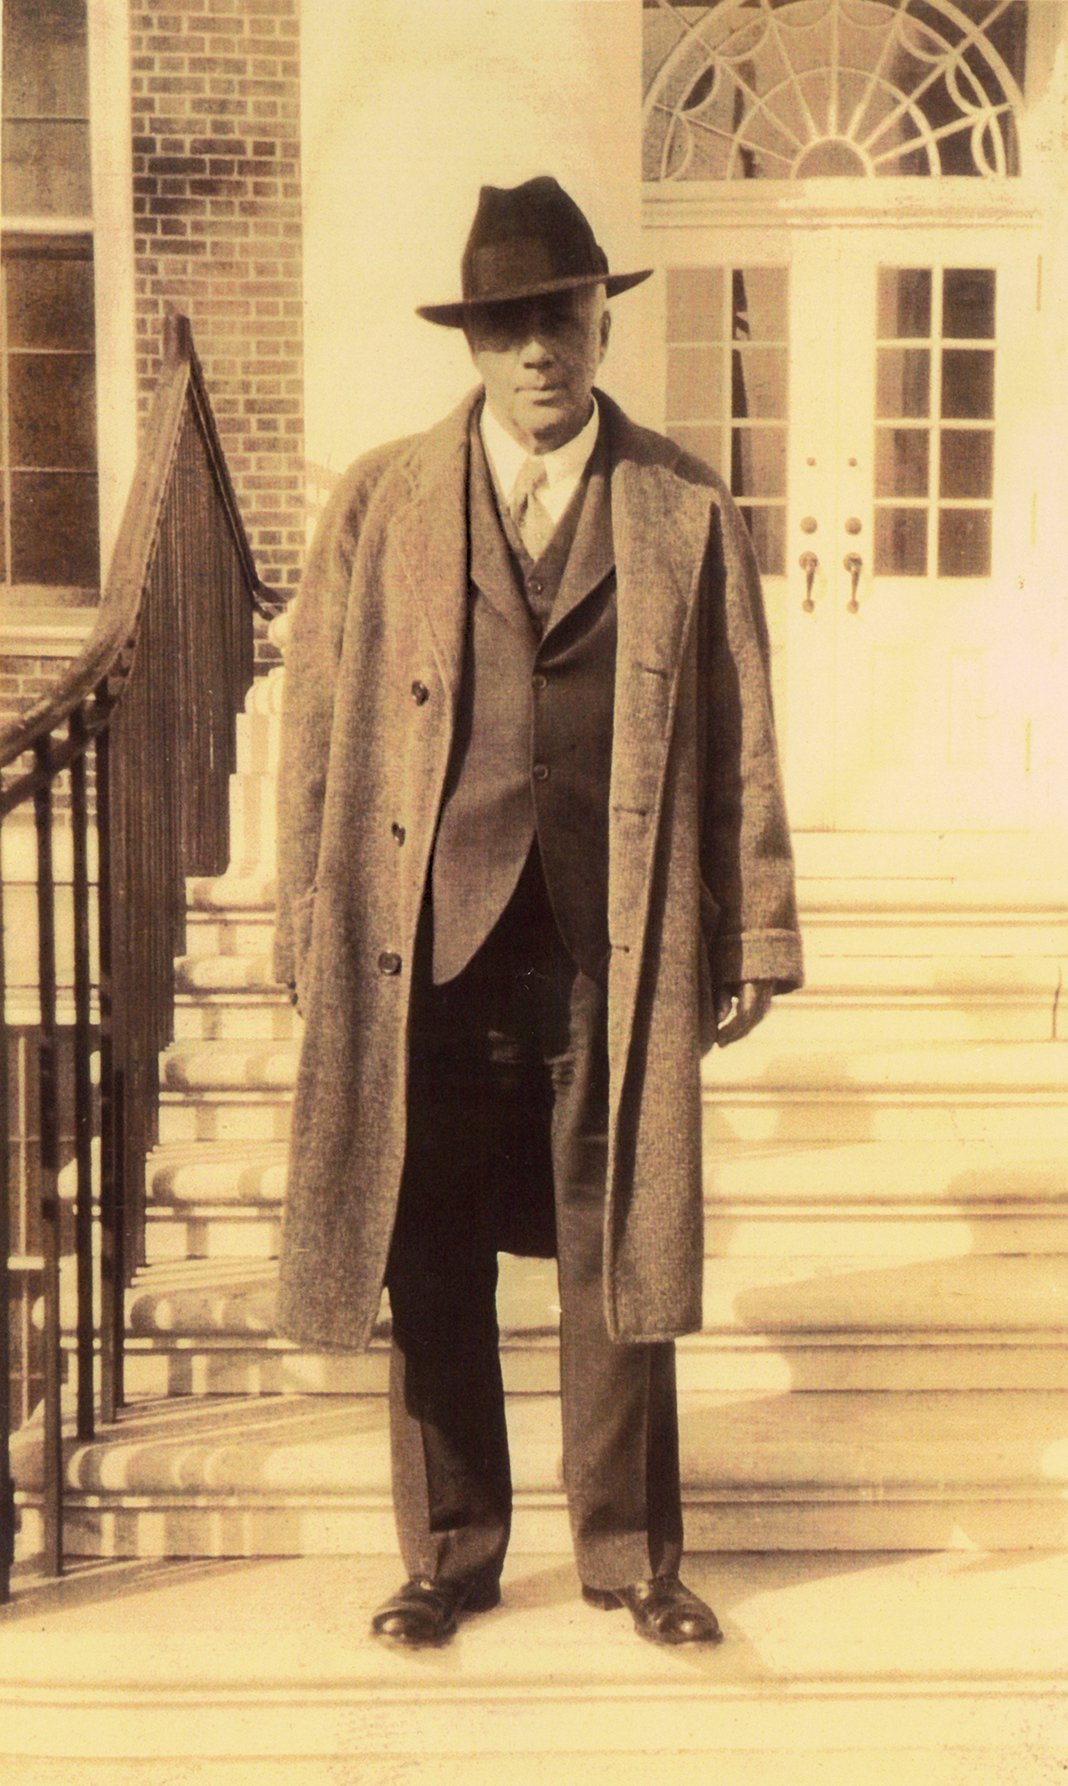 Robert Frost on the steps of Bunce Hall.